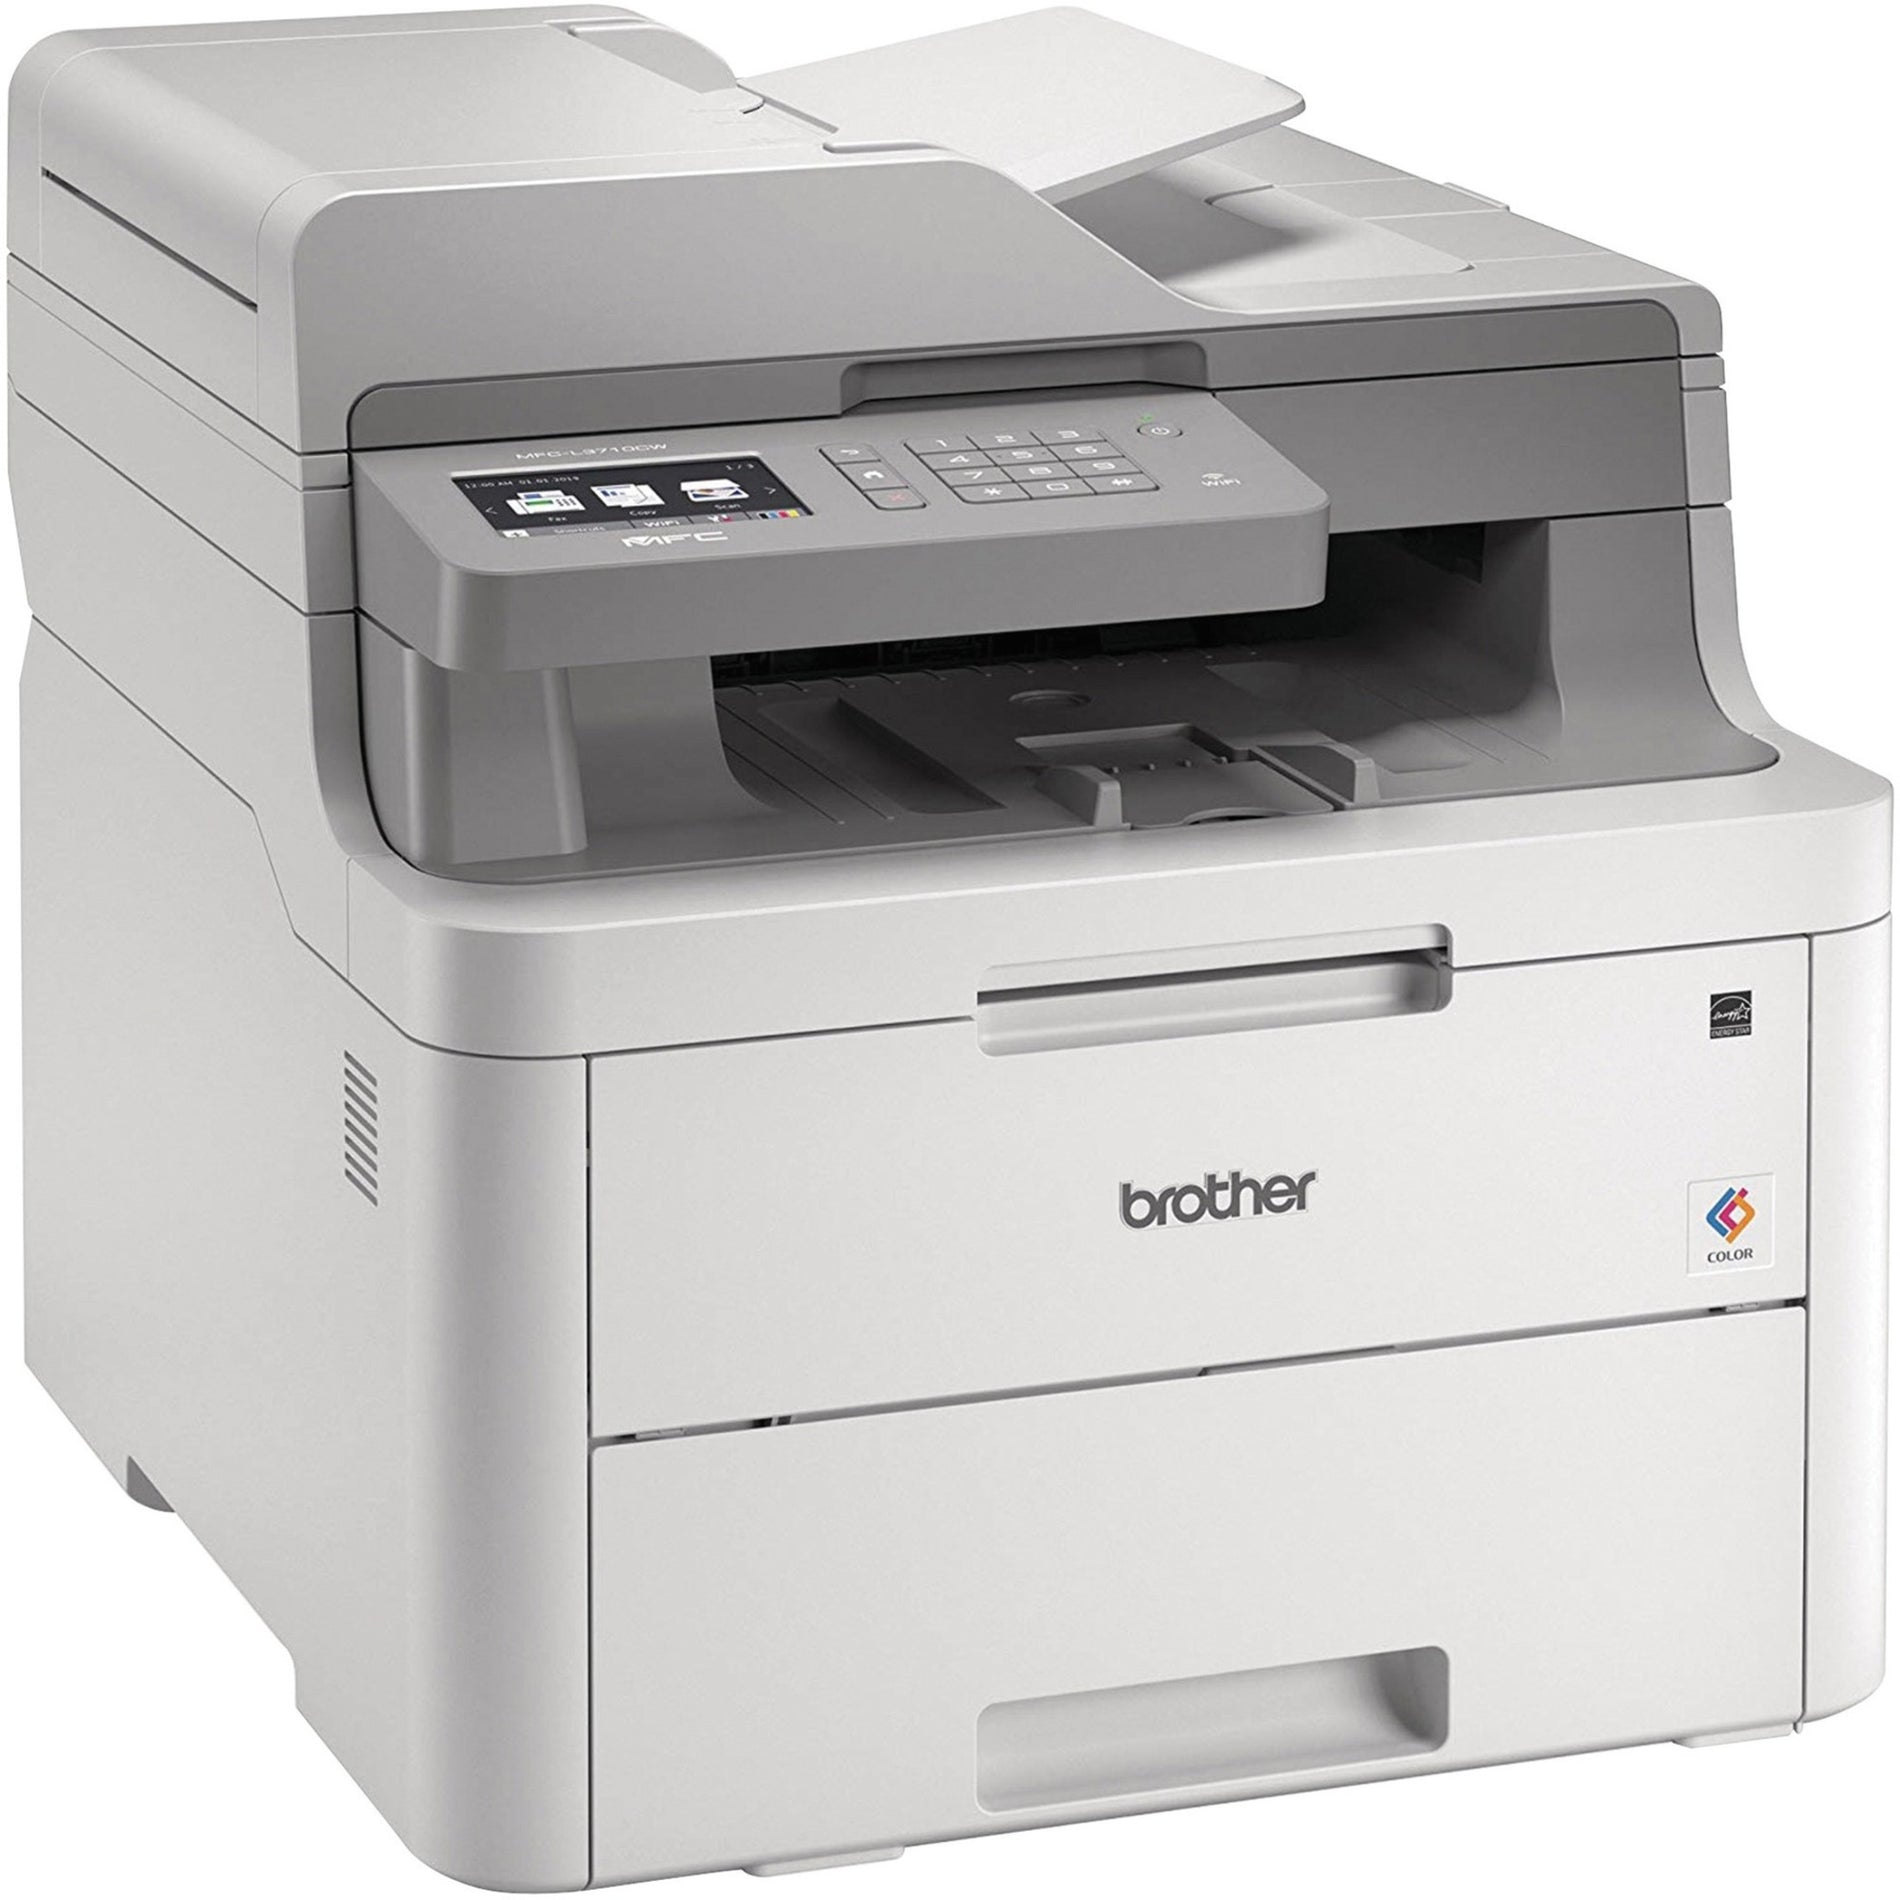 Brother MFC-L3710CW Laser Multifunction Printer, All-In-One, 19 ppm, 50-Sheet ADF, Wireless, Color